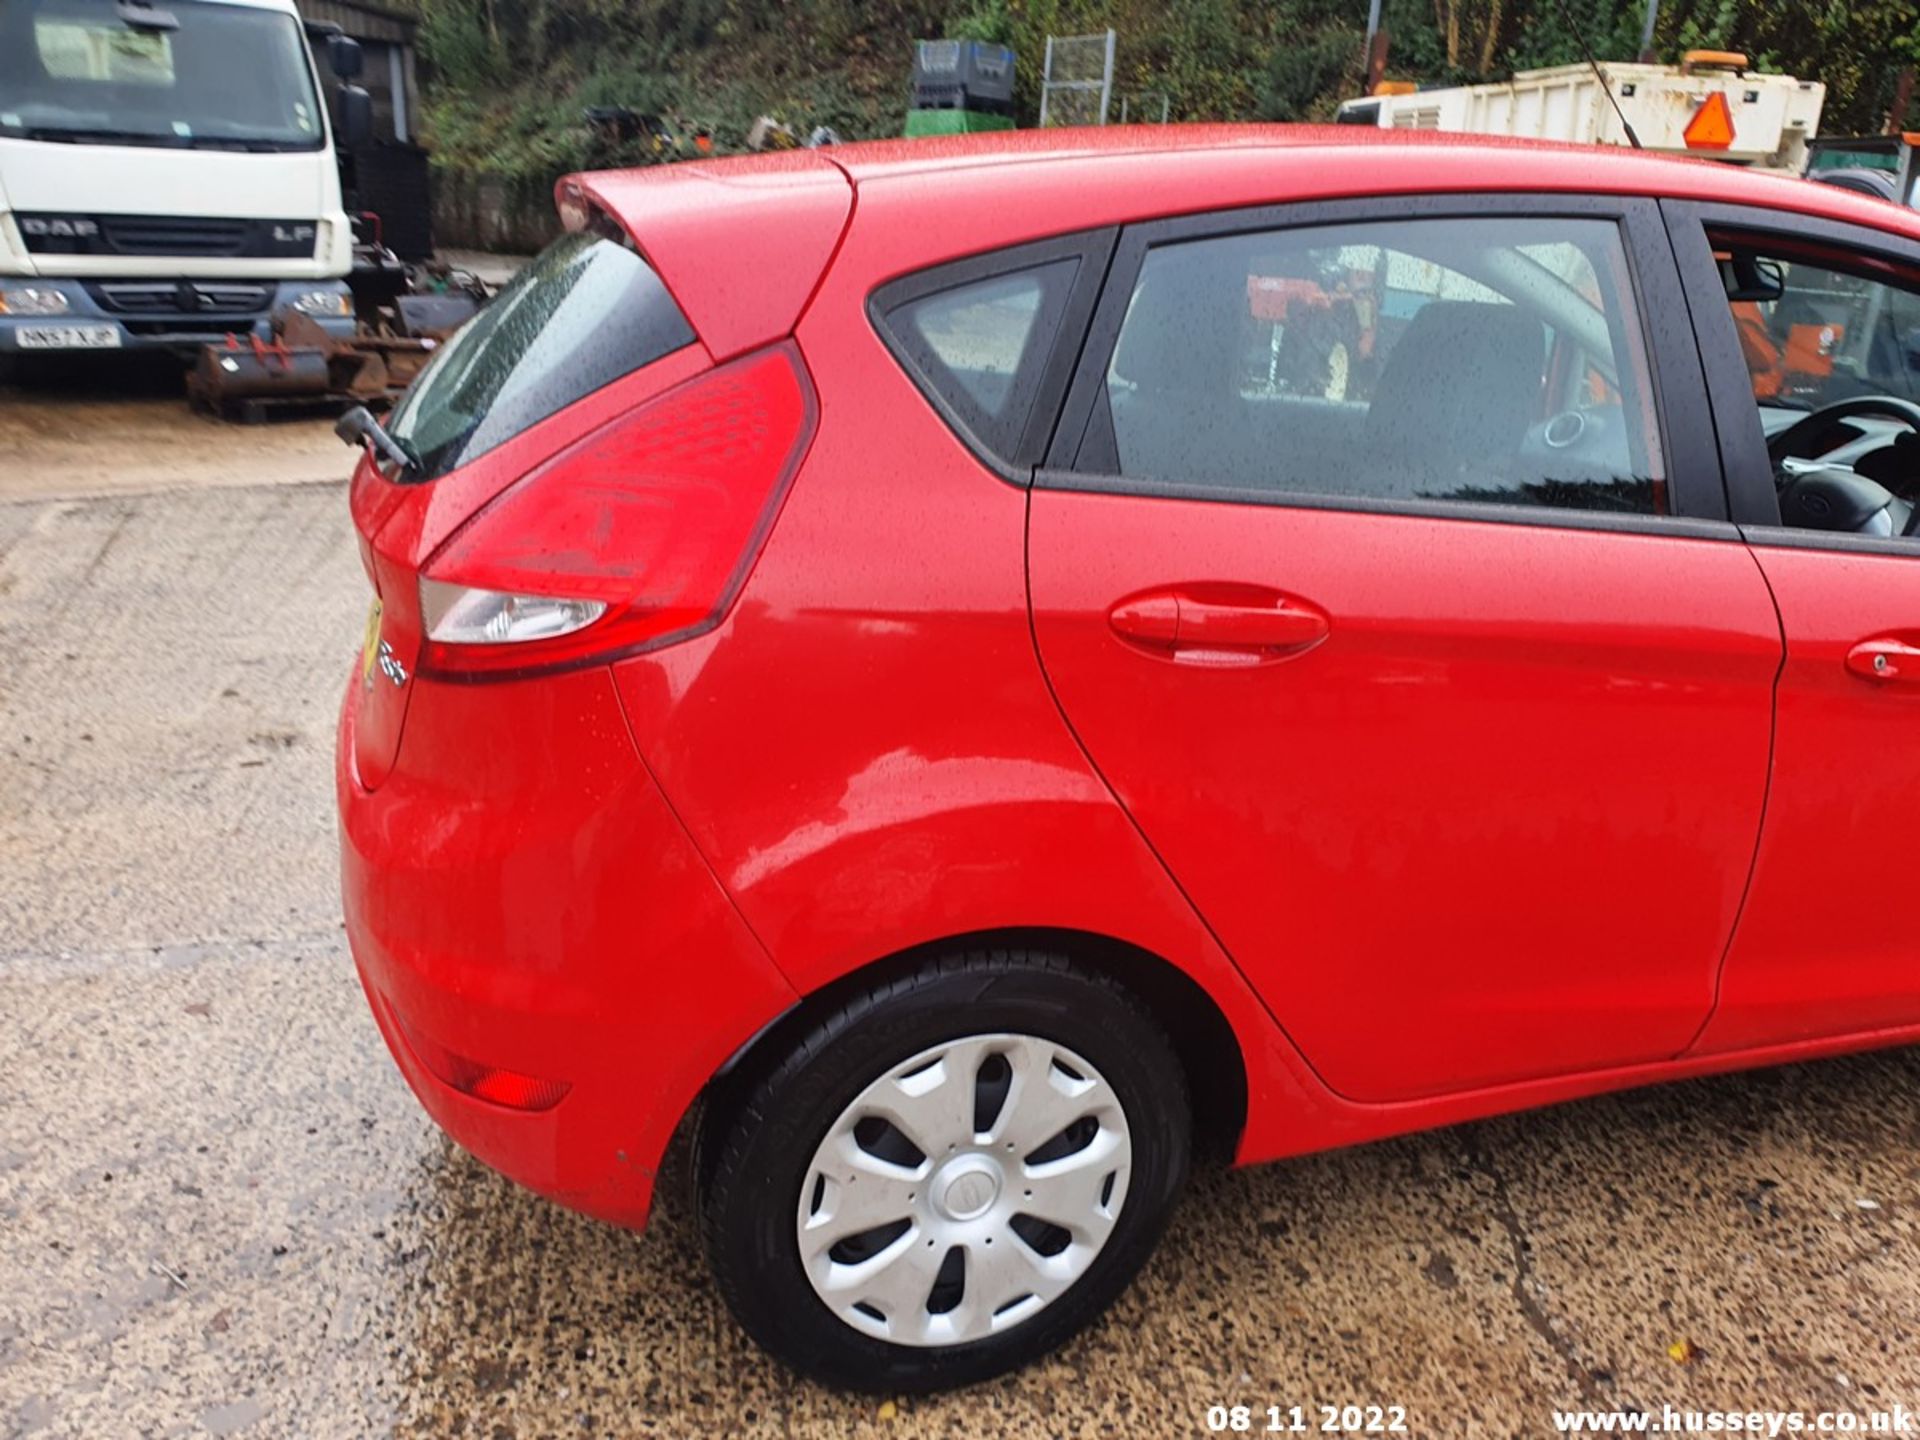 12/12 FORD FIESTA EDGE ECONETIC II T - 1560cc 5dr Hatchback (Red, 173k) - Image 21 of 59